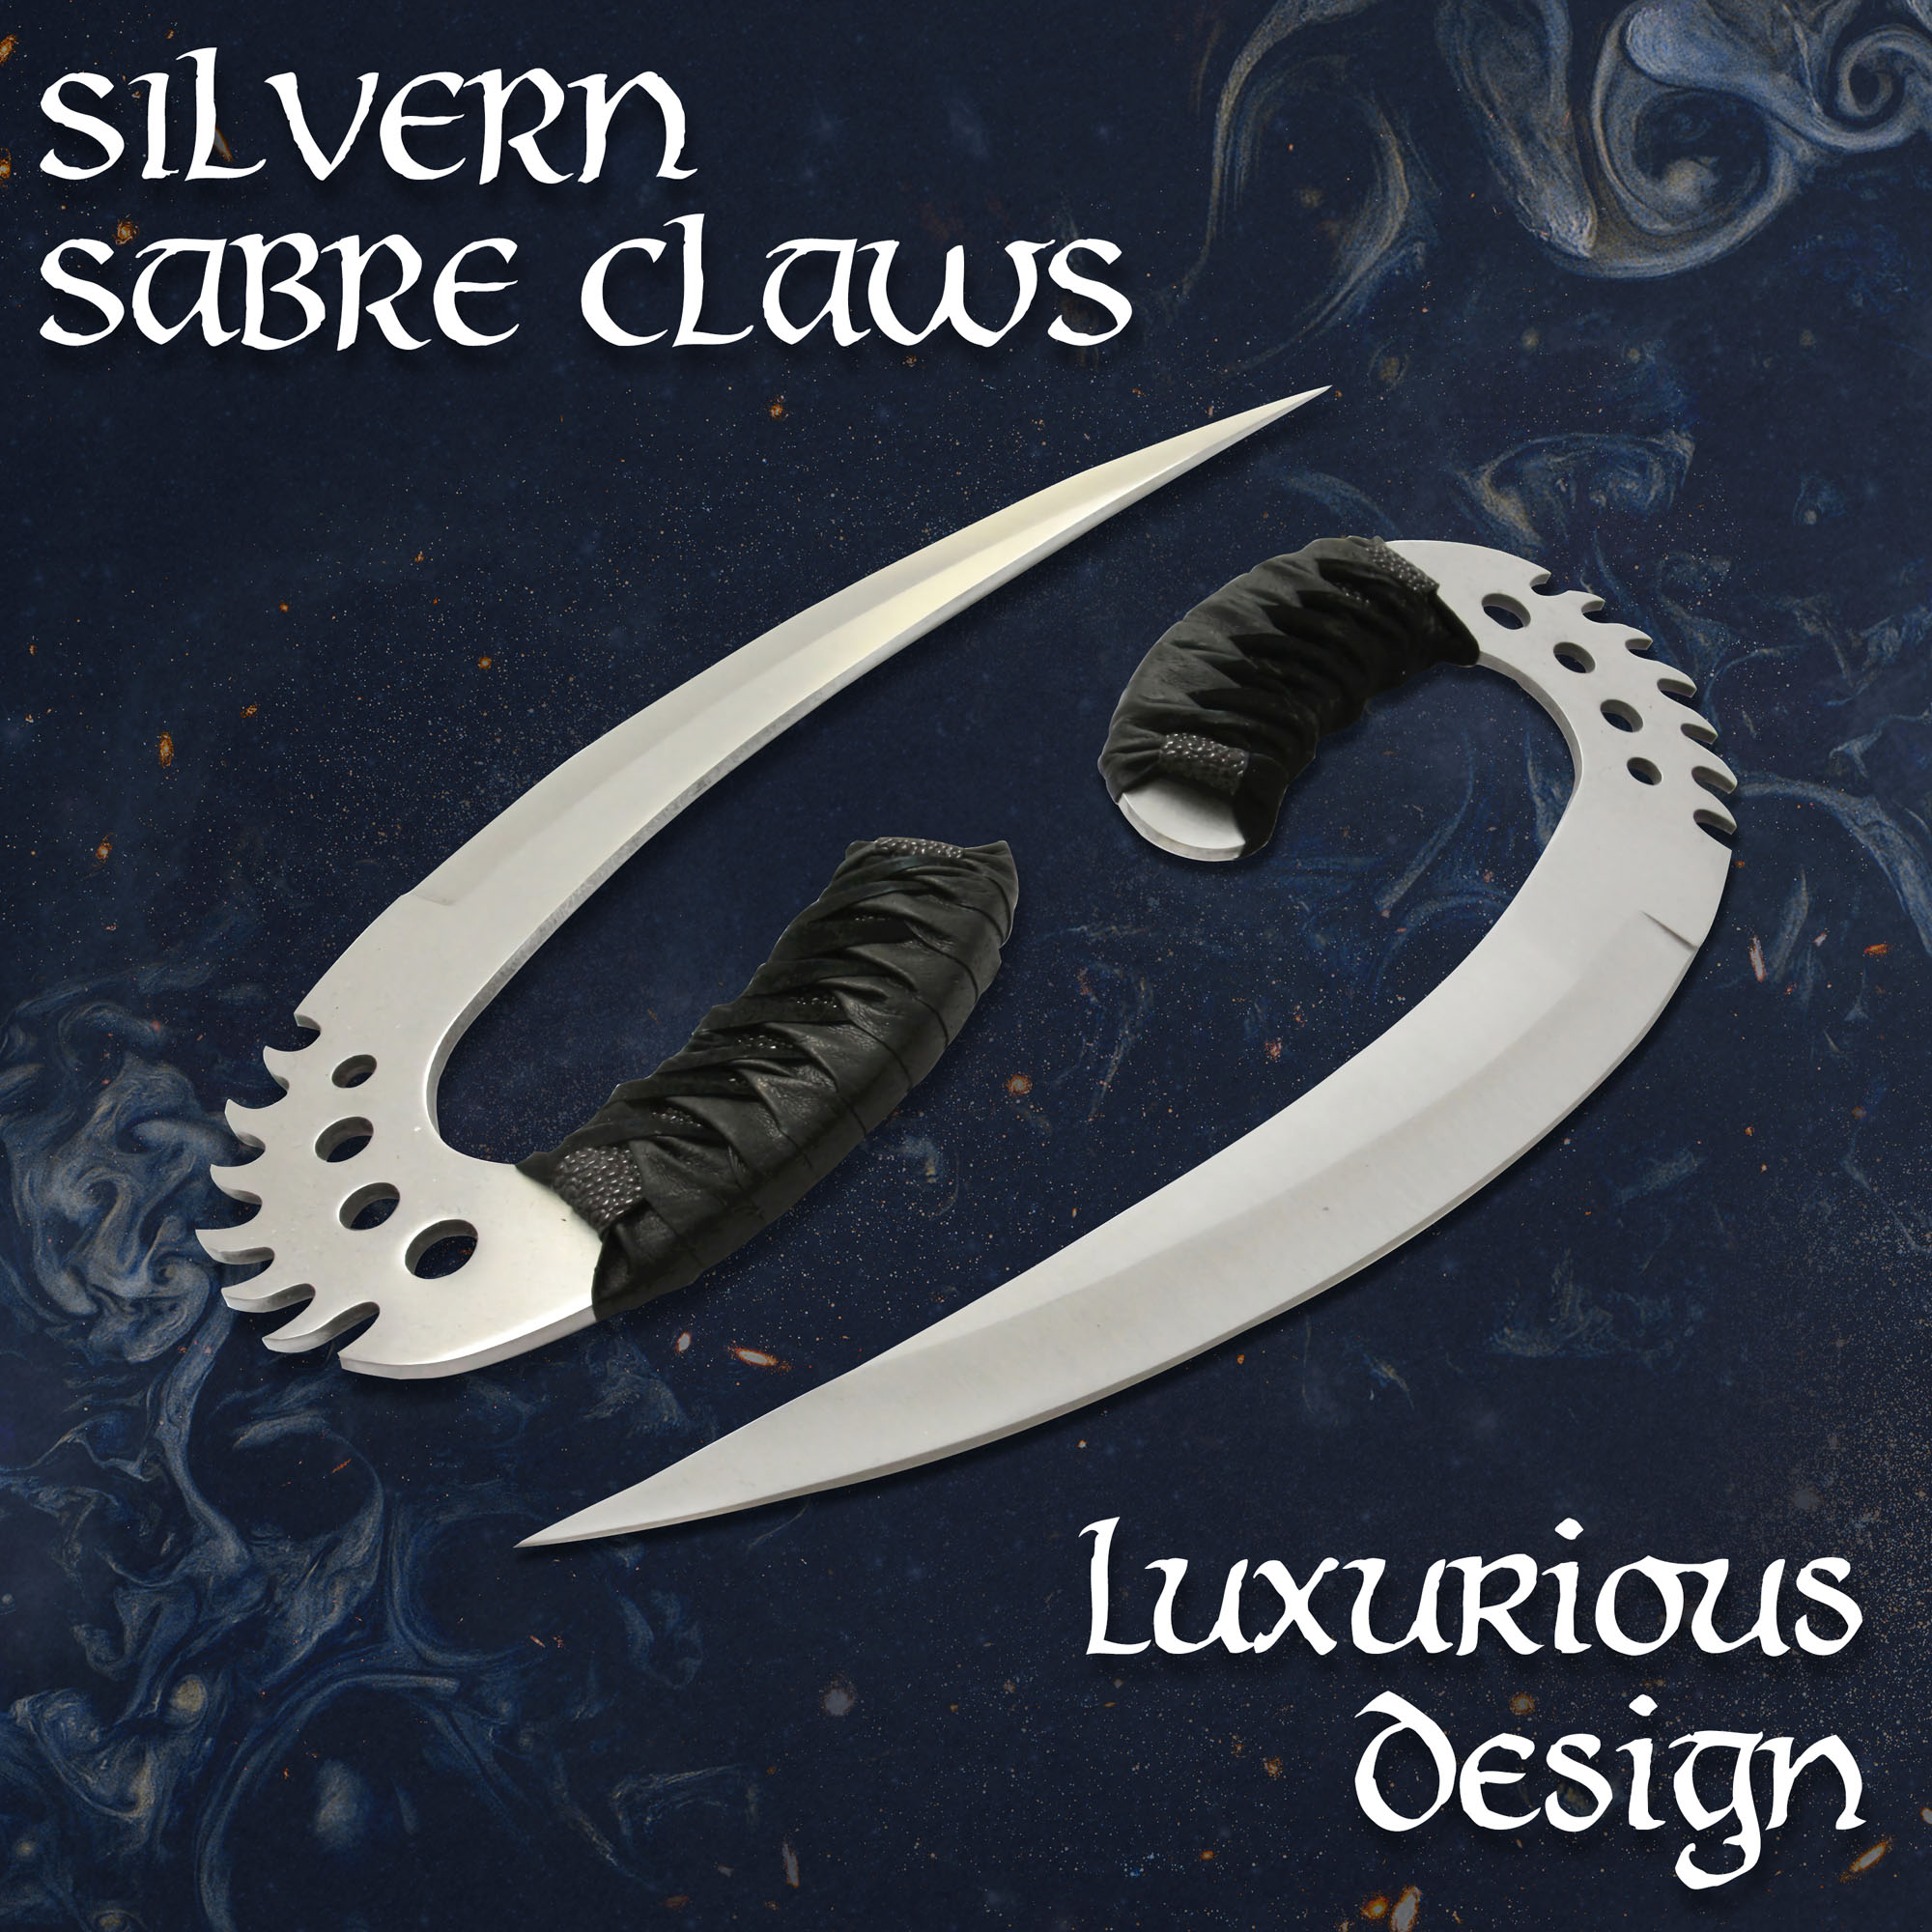 The Chronicles of Riddick - Silberne Sabre Claws